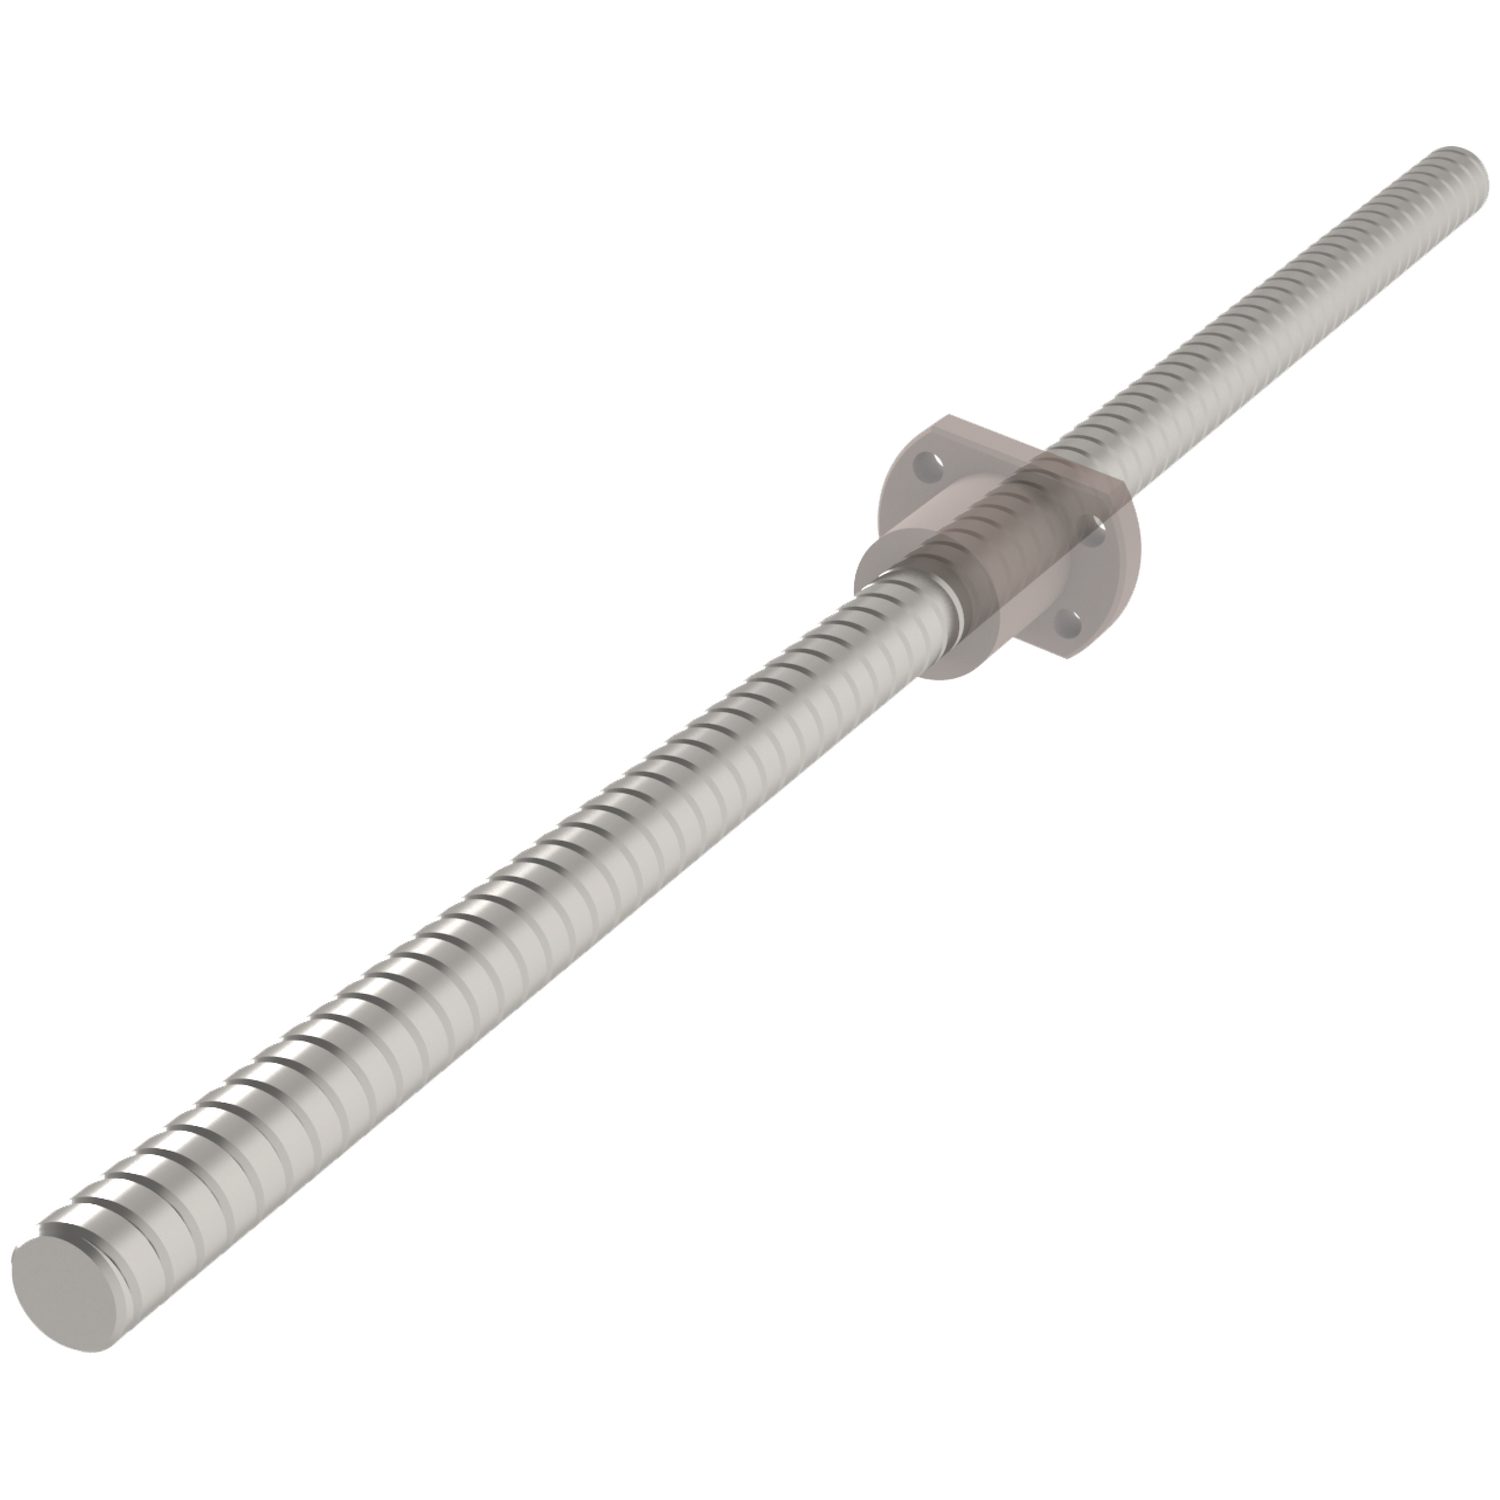 High Helix Lead Screws - Stainless Stainless SUS 304, high helix lead screw. High precision. See L1350 for corresponding nut.